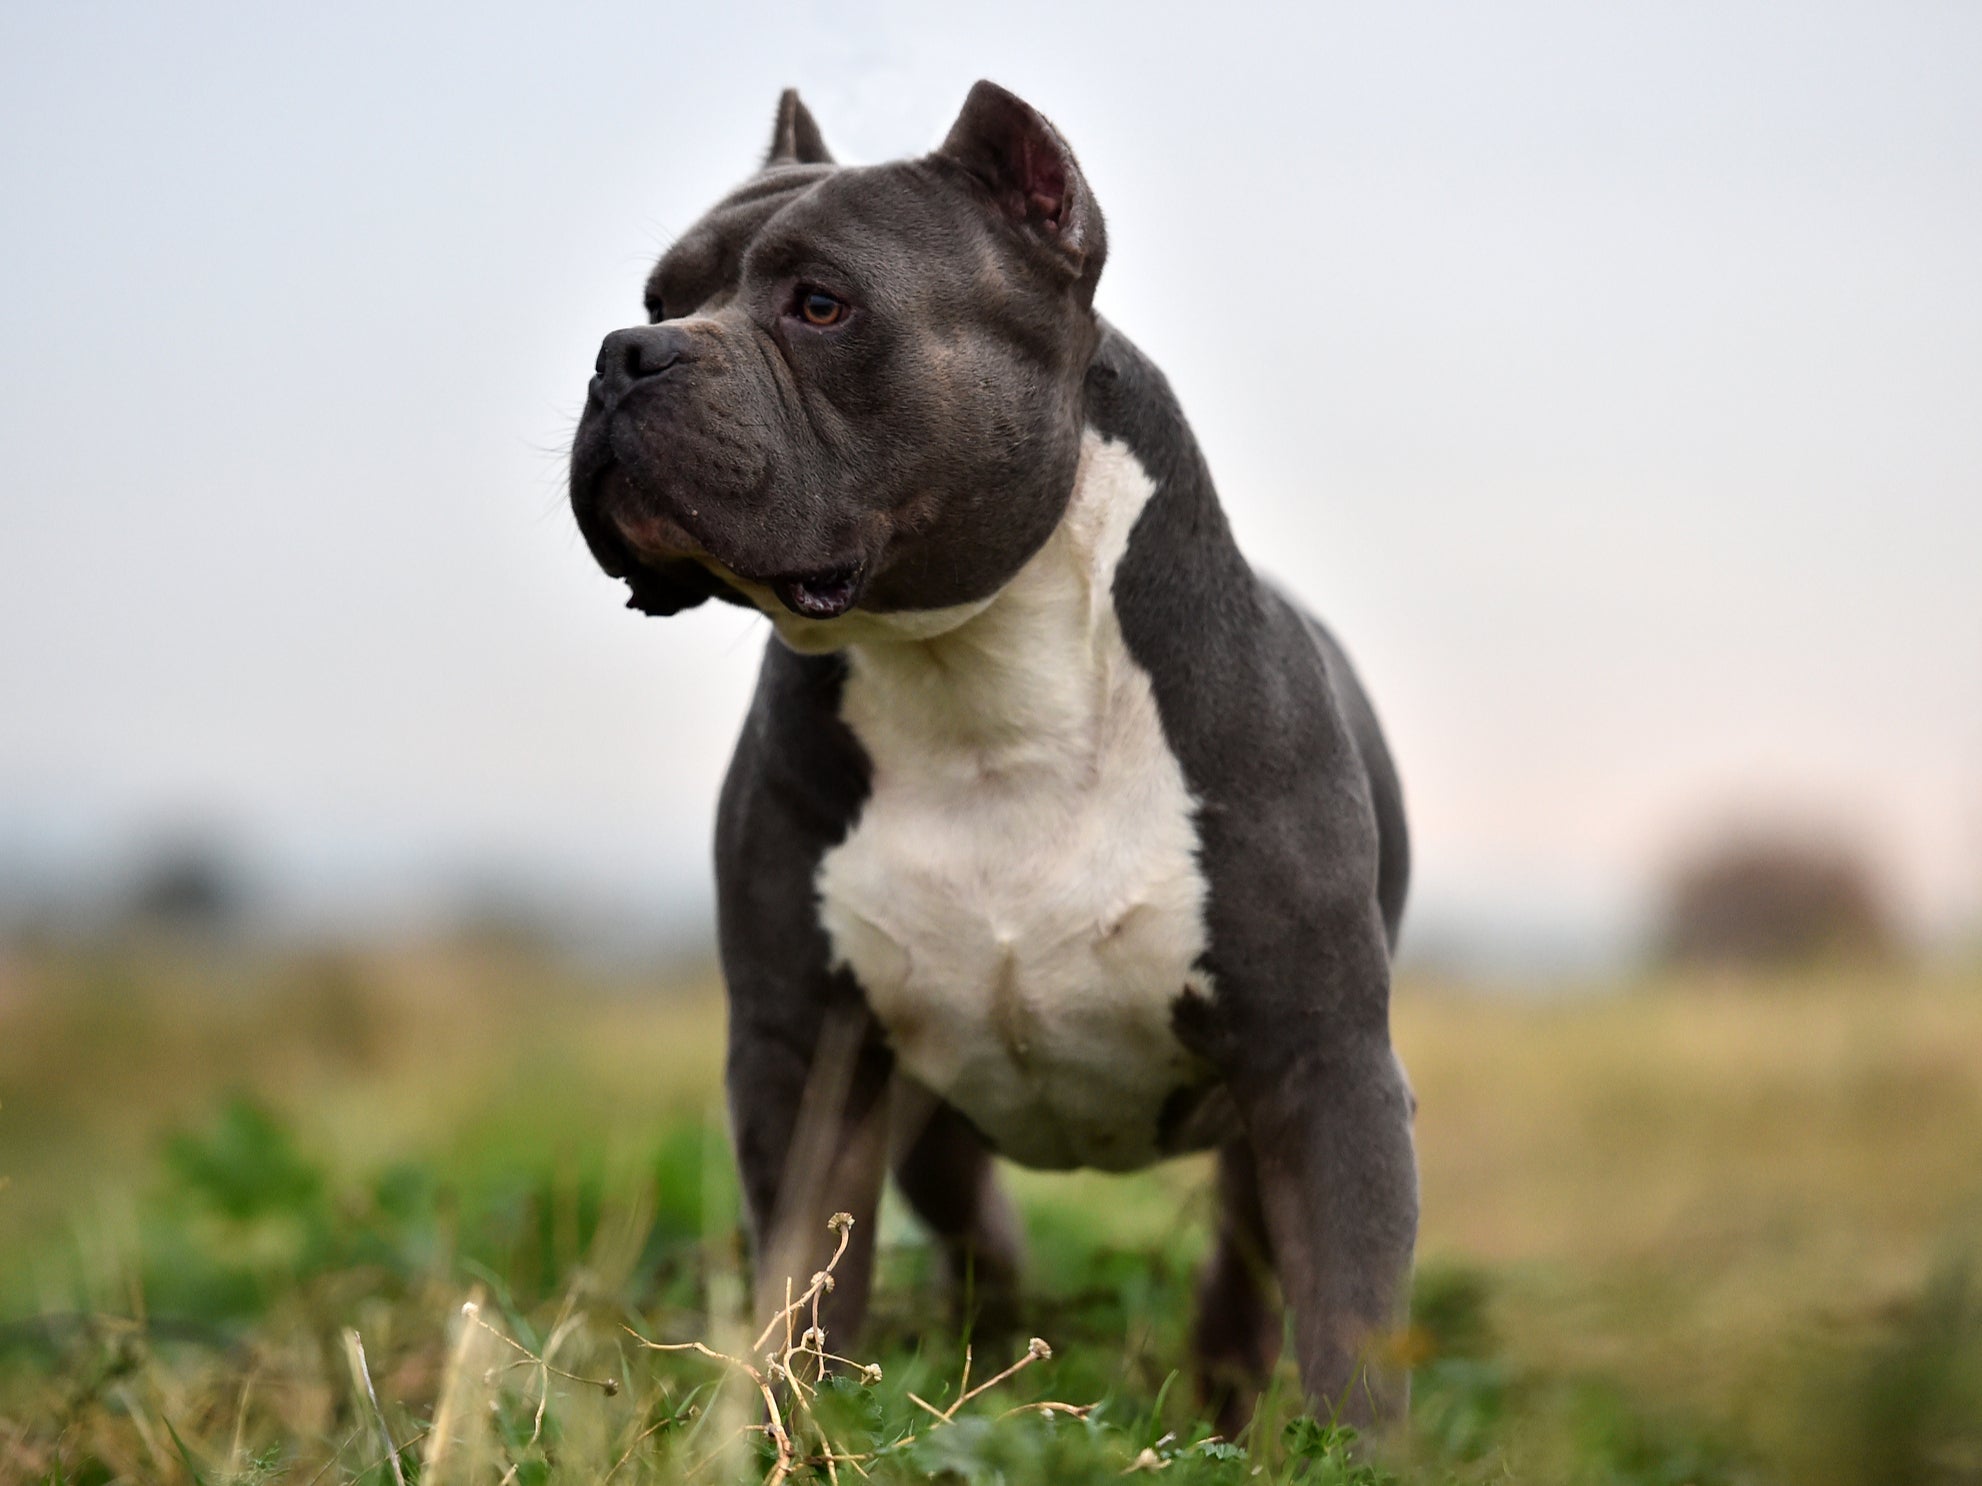 Demand for cropping the ears of American bully breeds is driving the illegal practice, a BBC investigation found